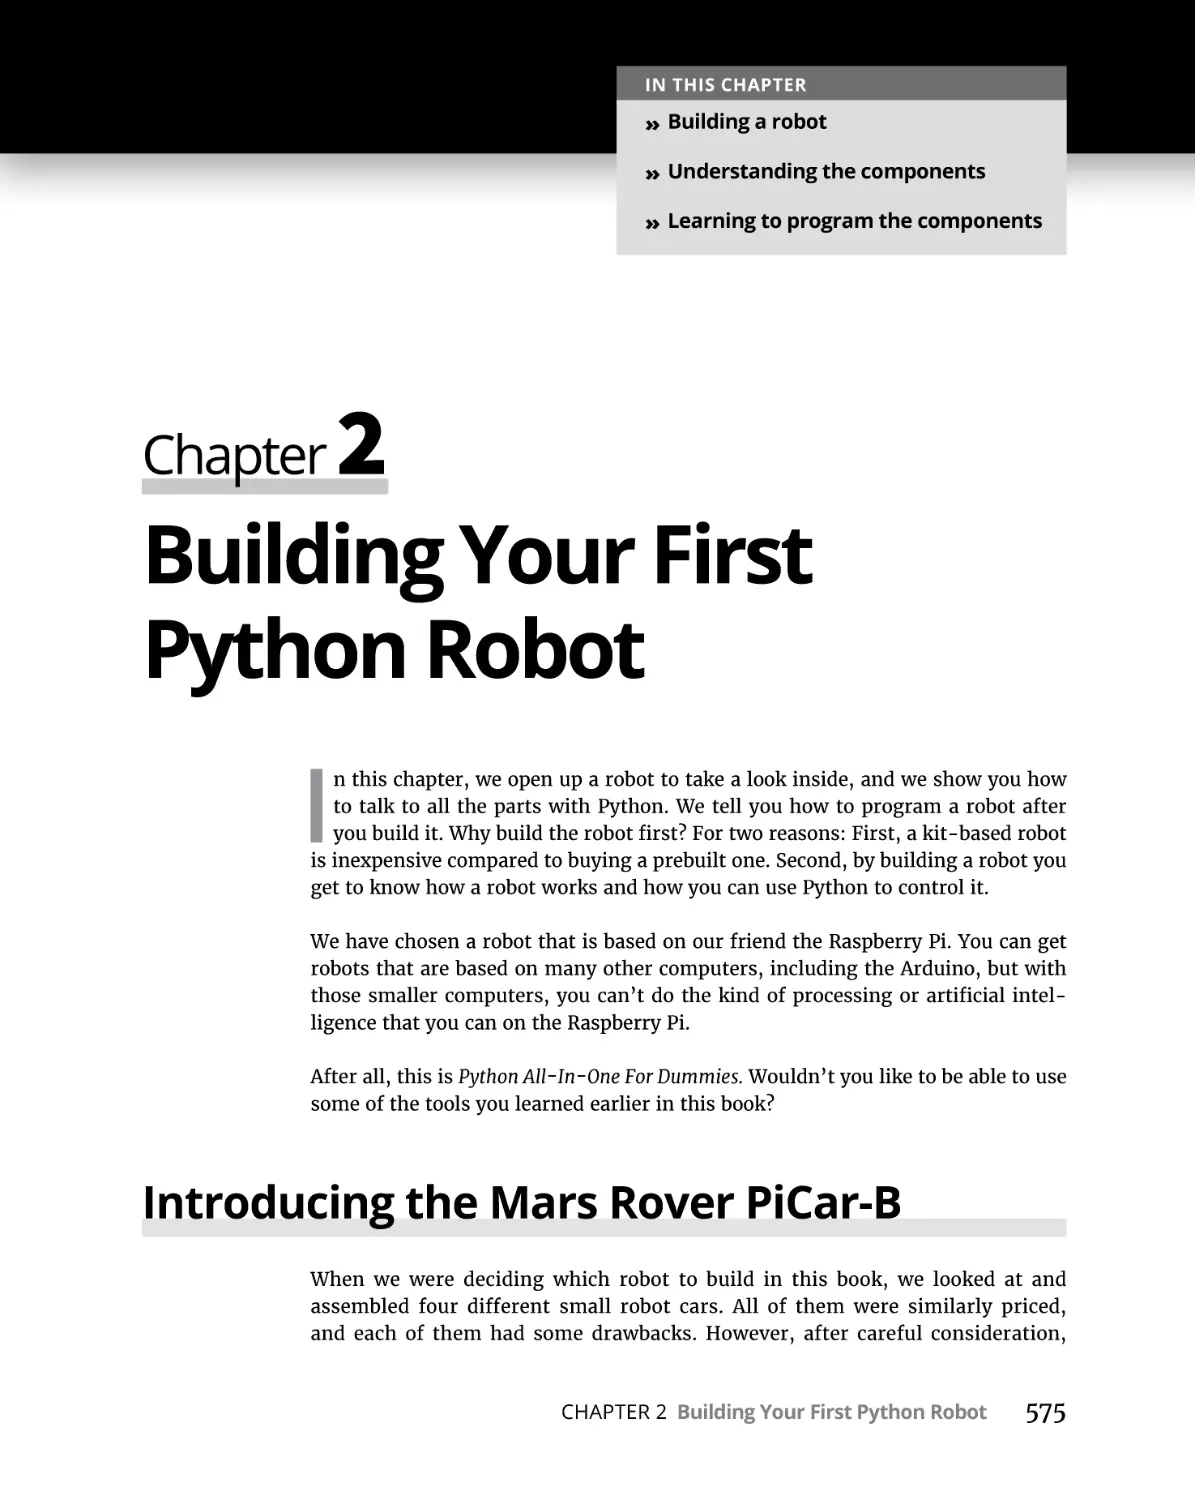 Chapter 2 Building Your First Python Robot
Introducing the Mars Rover PiCar-B